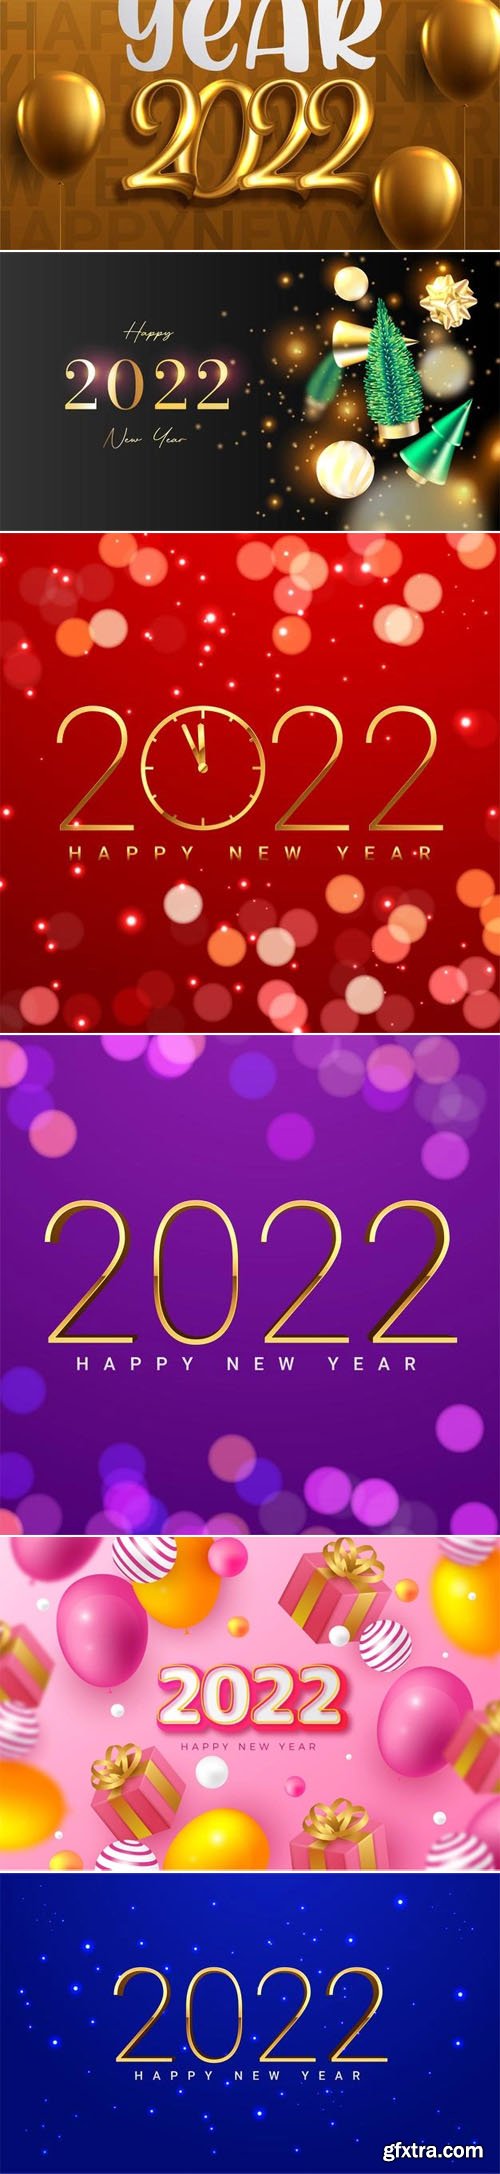 11 Happy New Year 2022 Backgrounds Vector Collection